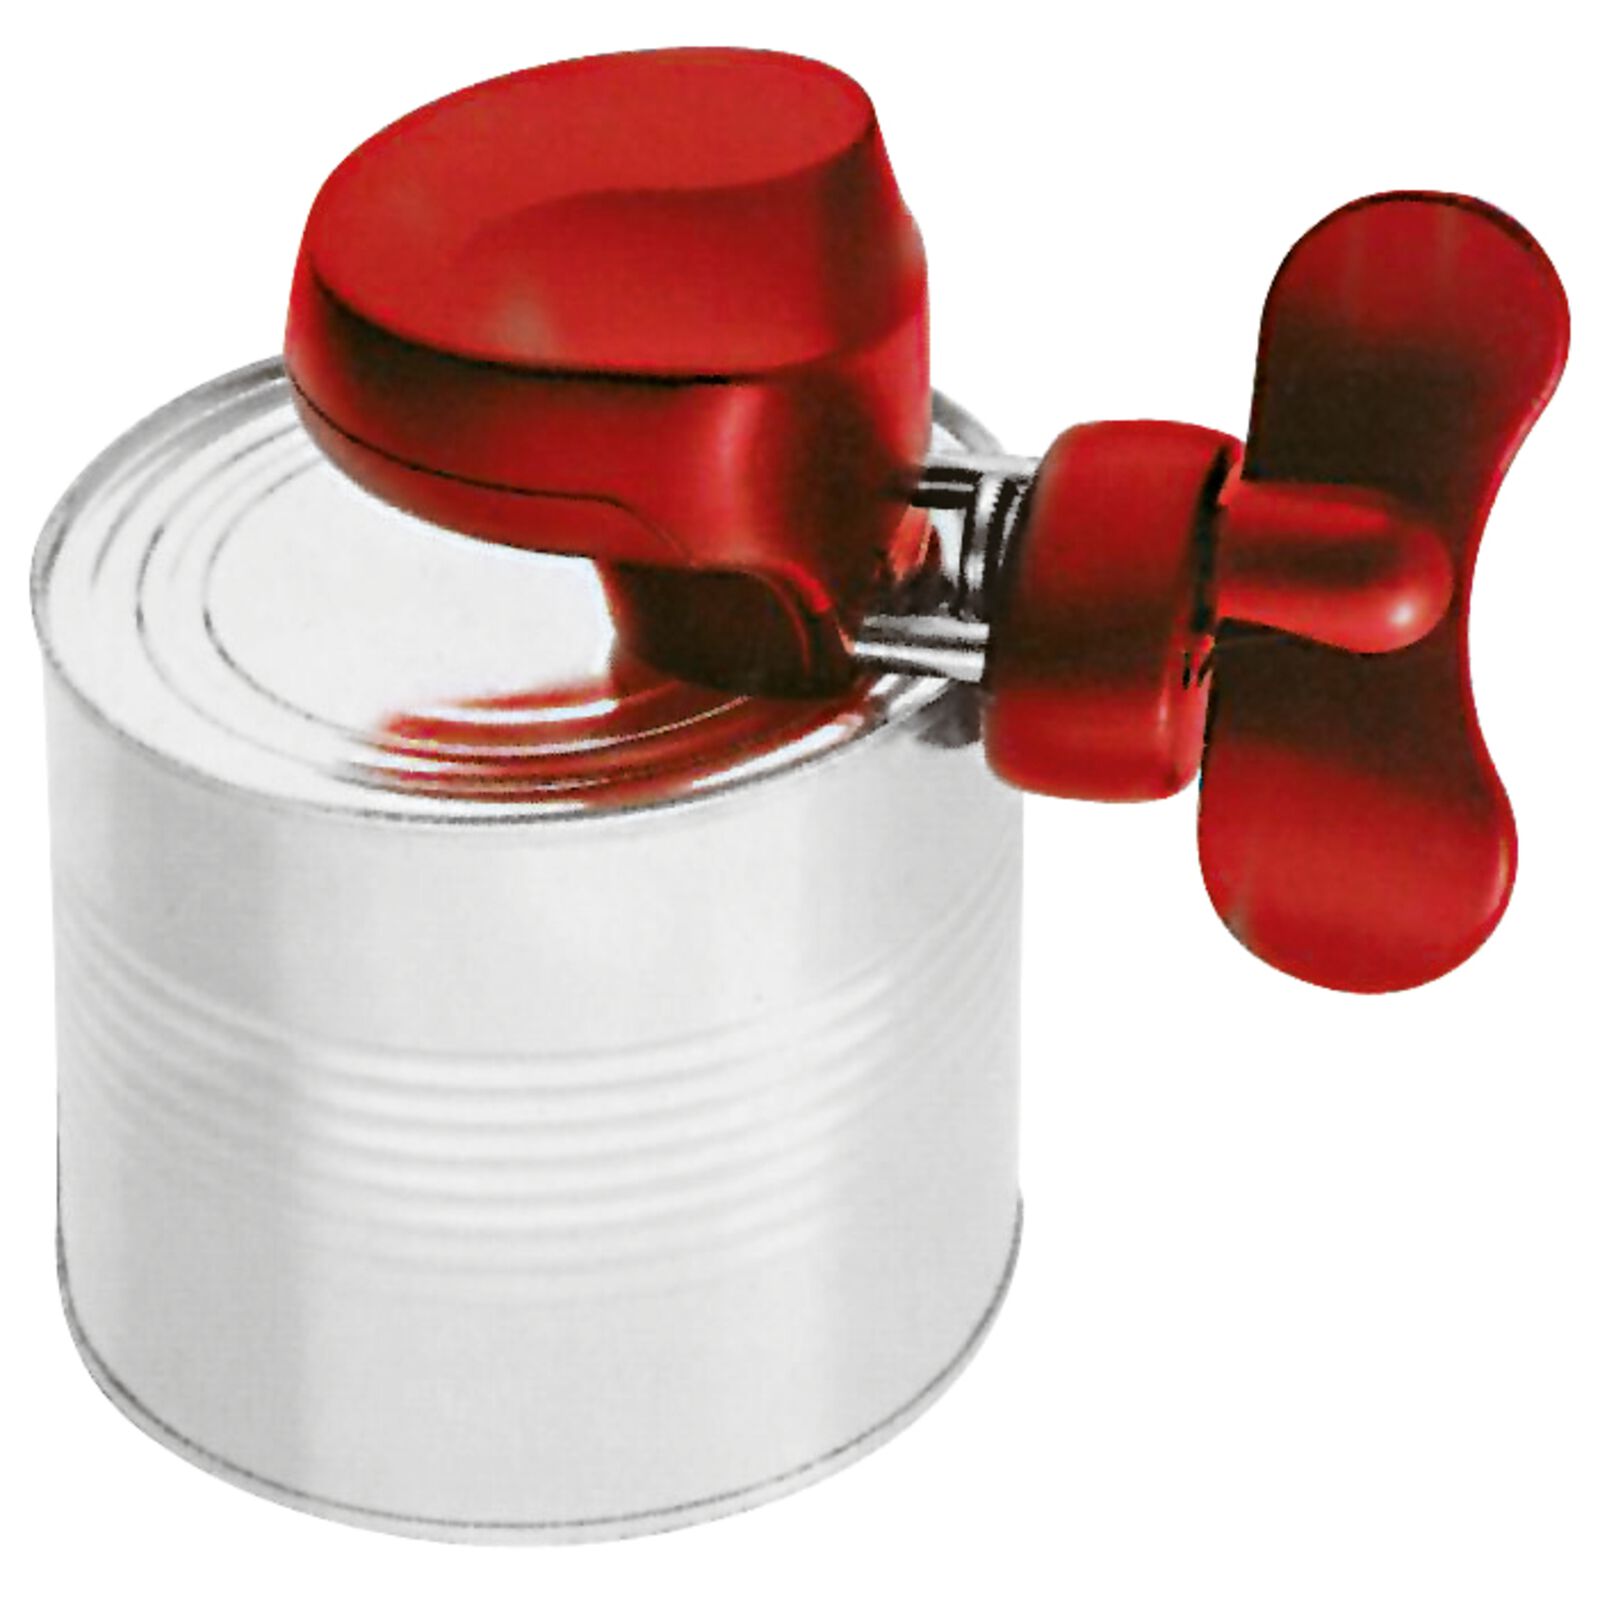 Paderno World Cuisine Can Opener with Polypropylene Handle